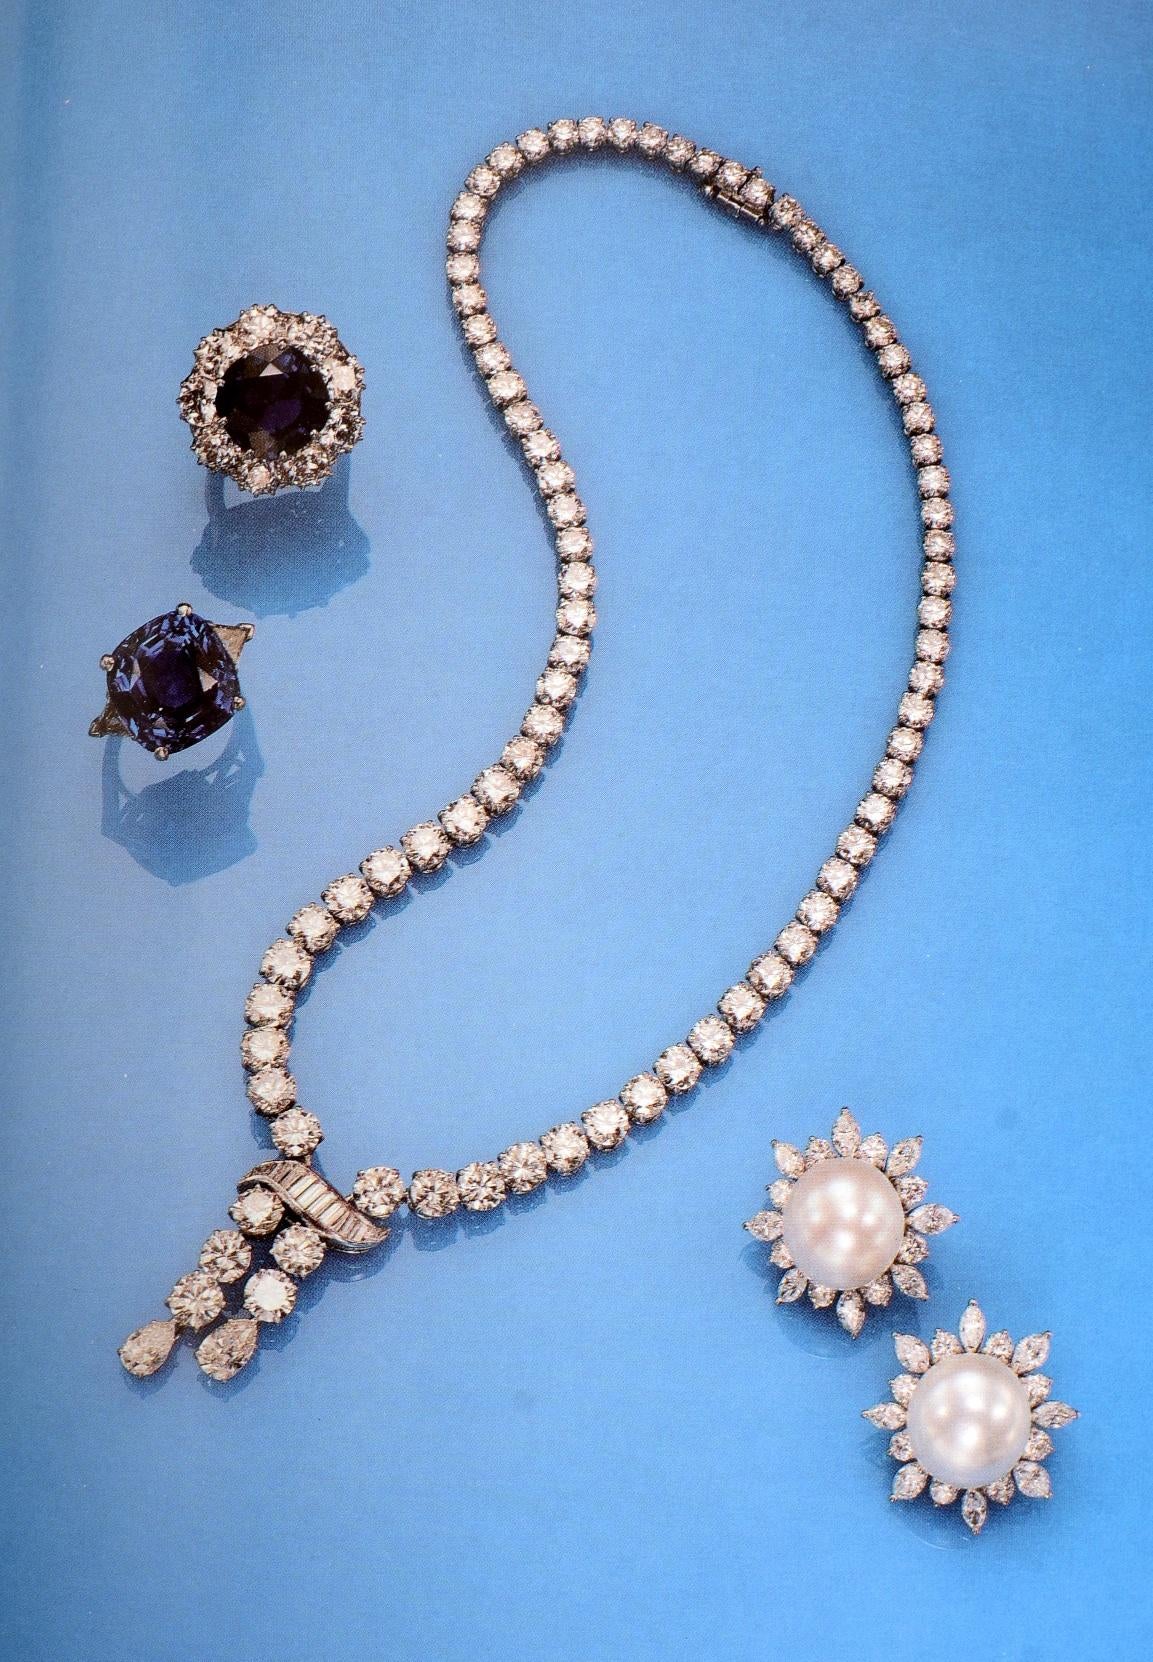 American Magnificent Jewelry, New York, April 22-23, 1991, Sotheby's Sale # 6163